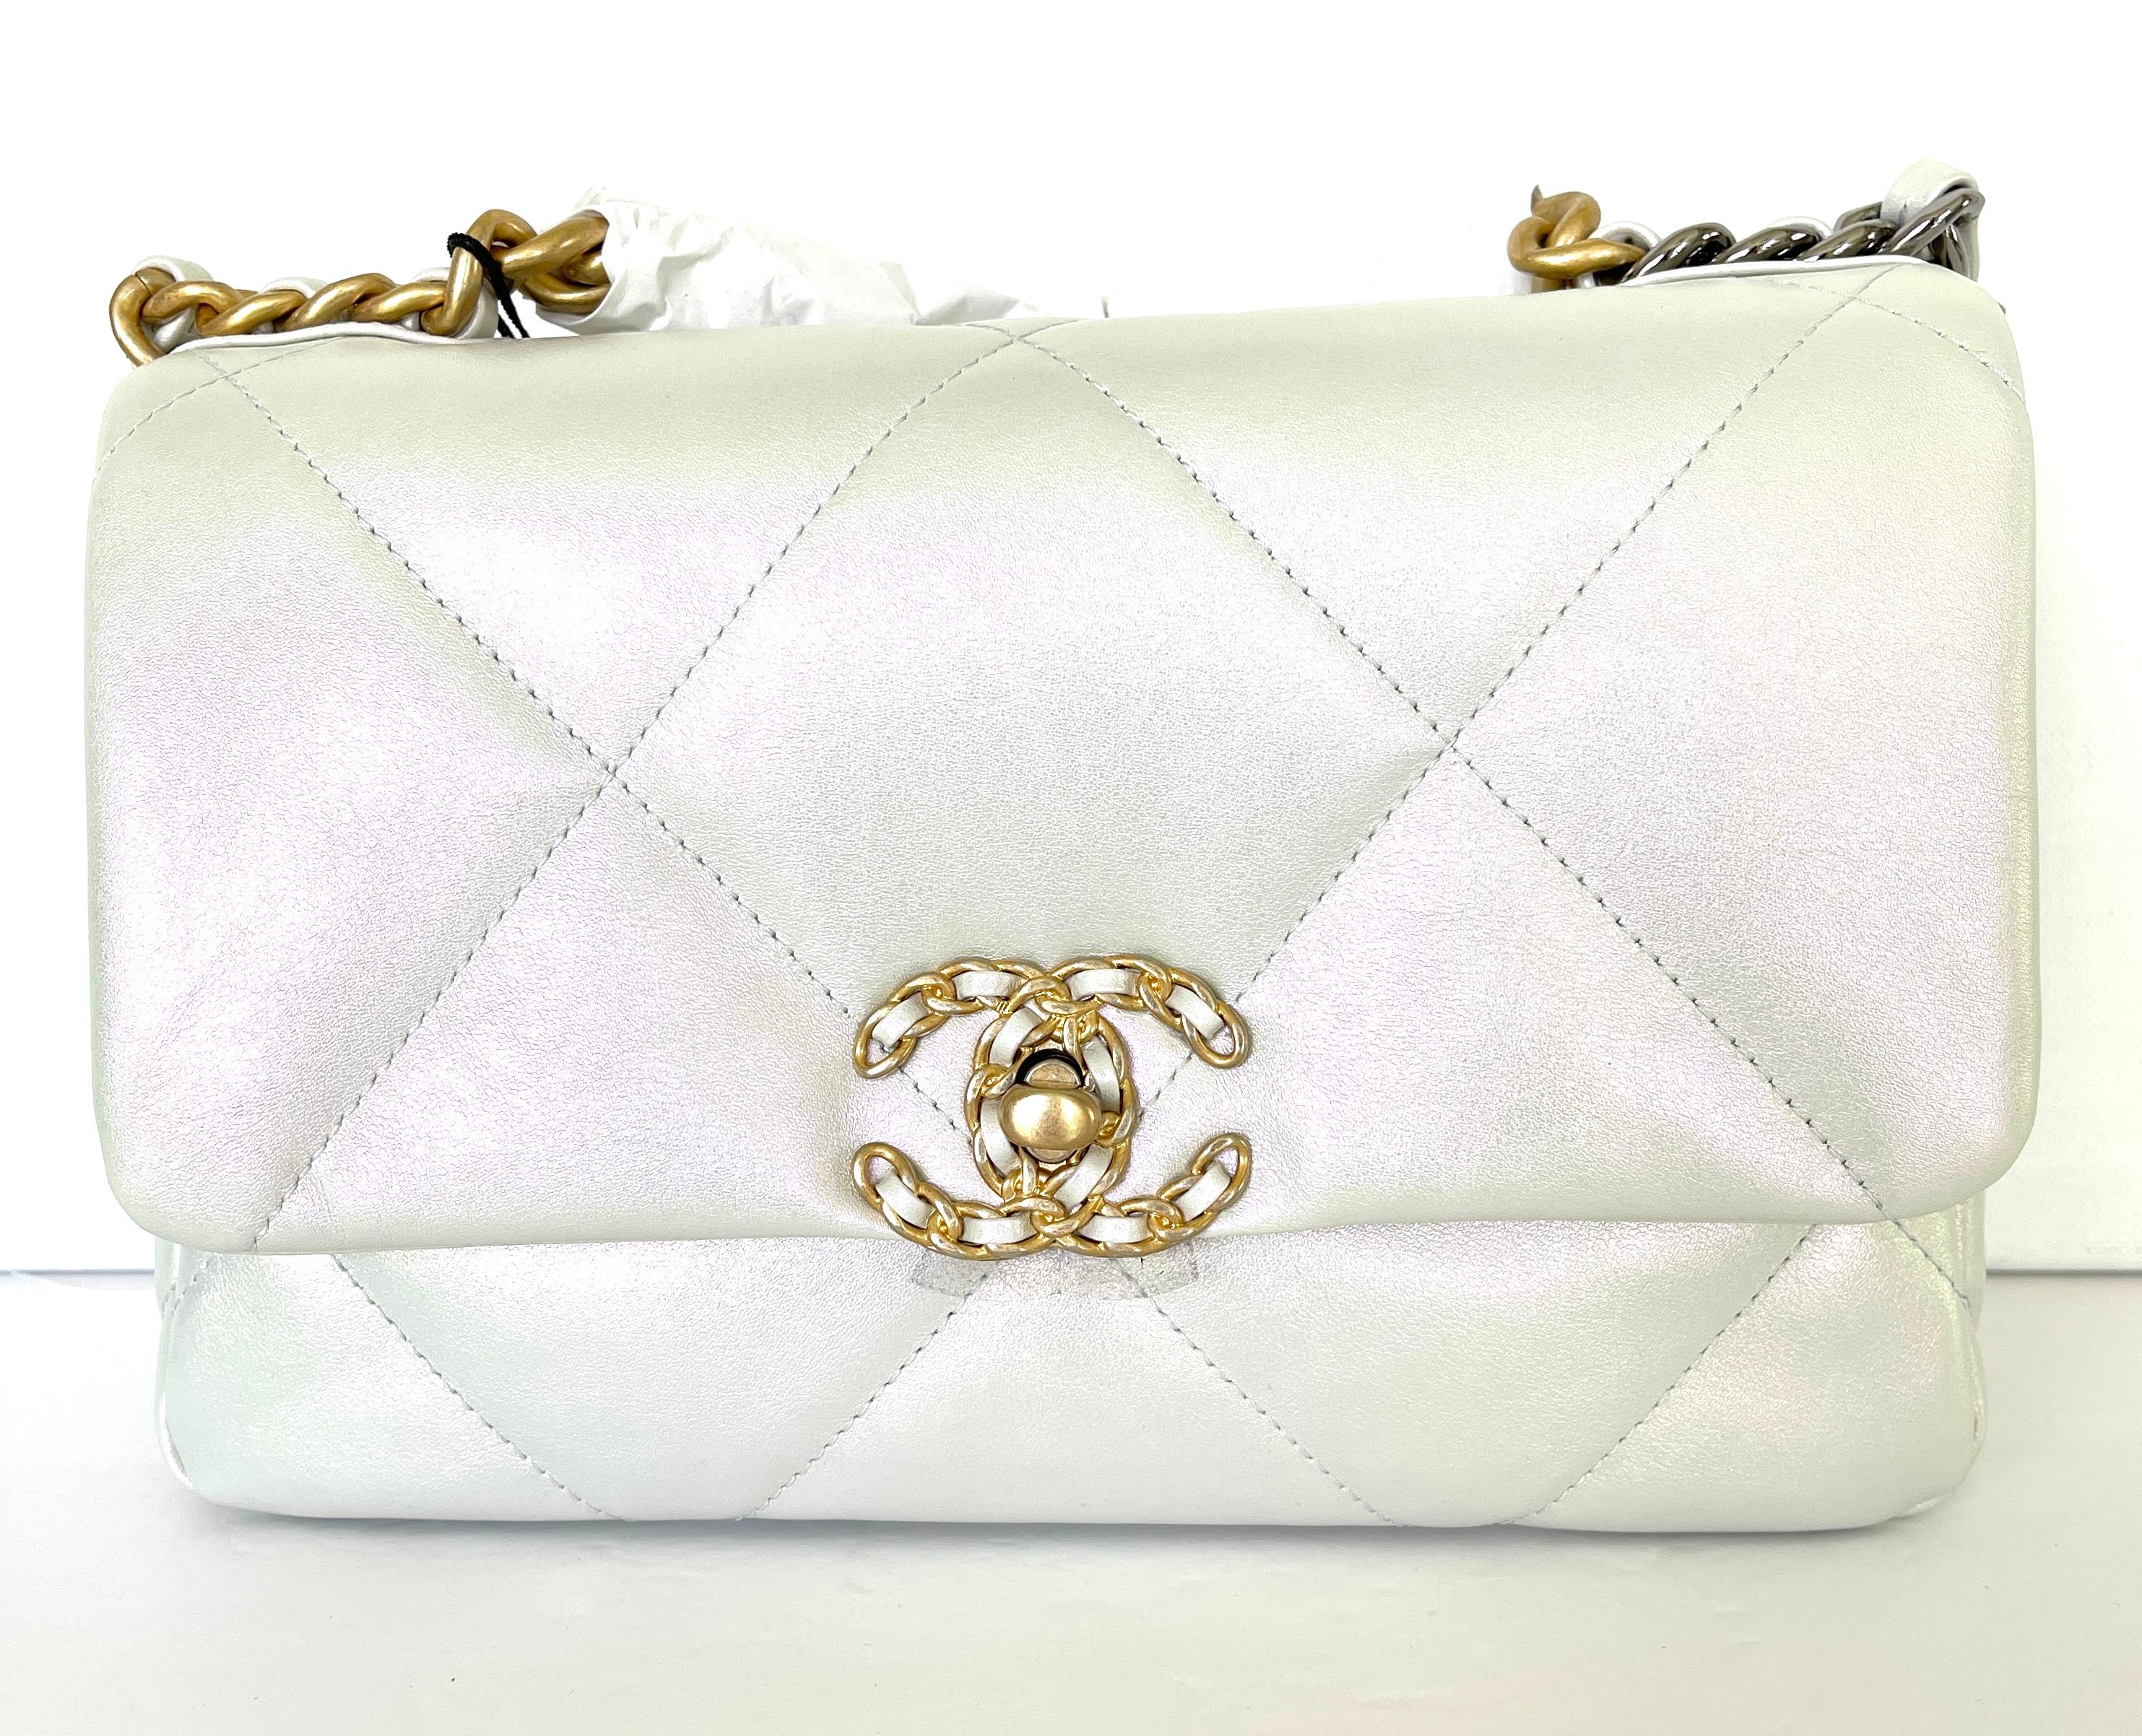 Women's or Men's CHANEL Small 19 Flap Bag 21P Iridescent White Goatskin NEW Gold Silver